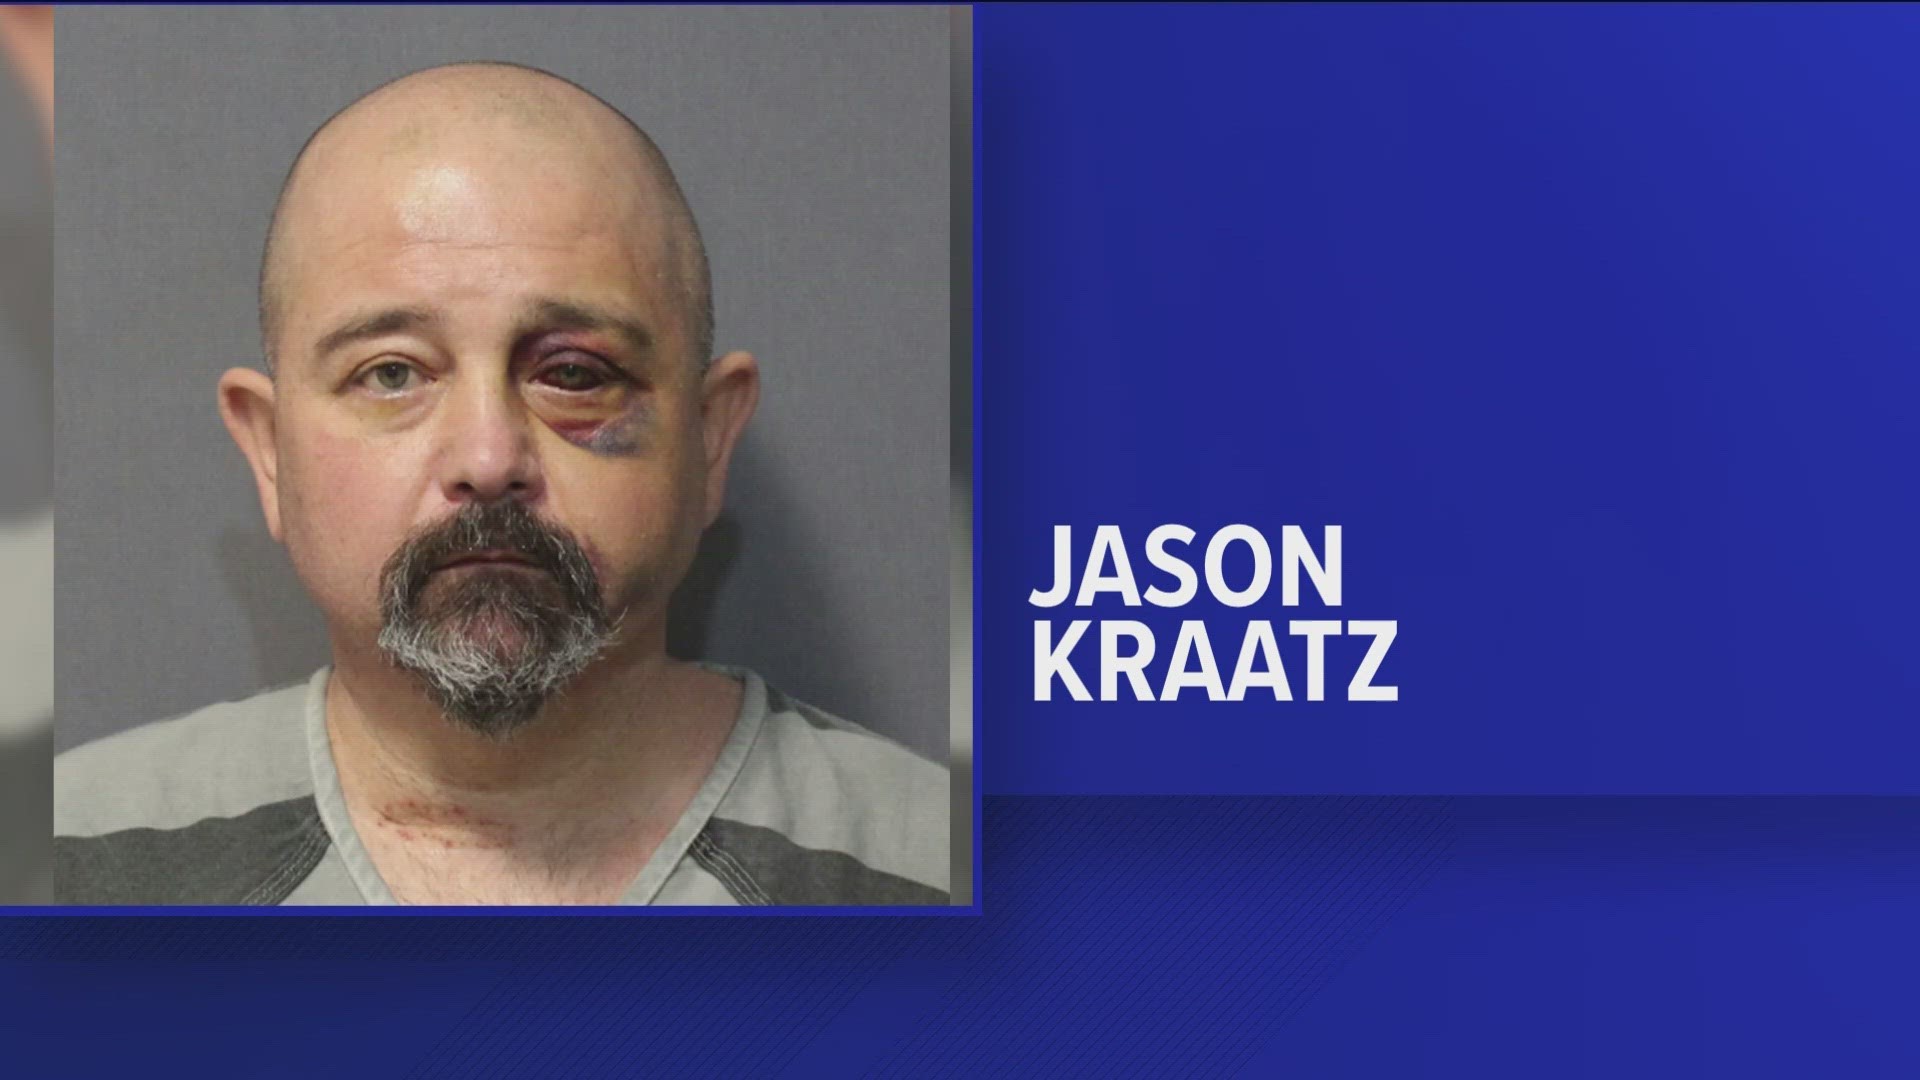 Jason Kraatz, 48, was arrested Tuesday for allegedly stabbing another person multiple times on March 20 in the 7900 block of N. Dixie Highway in Berlin Township.